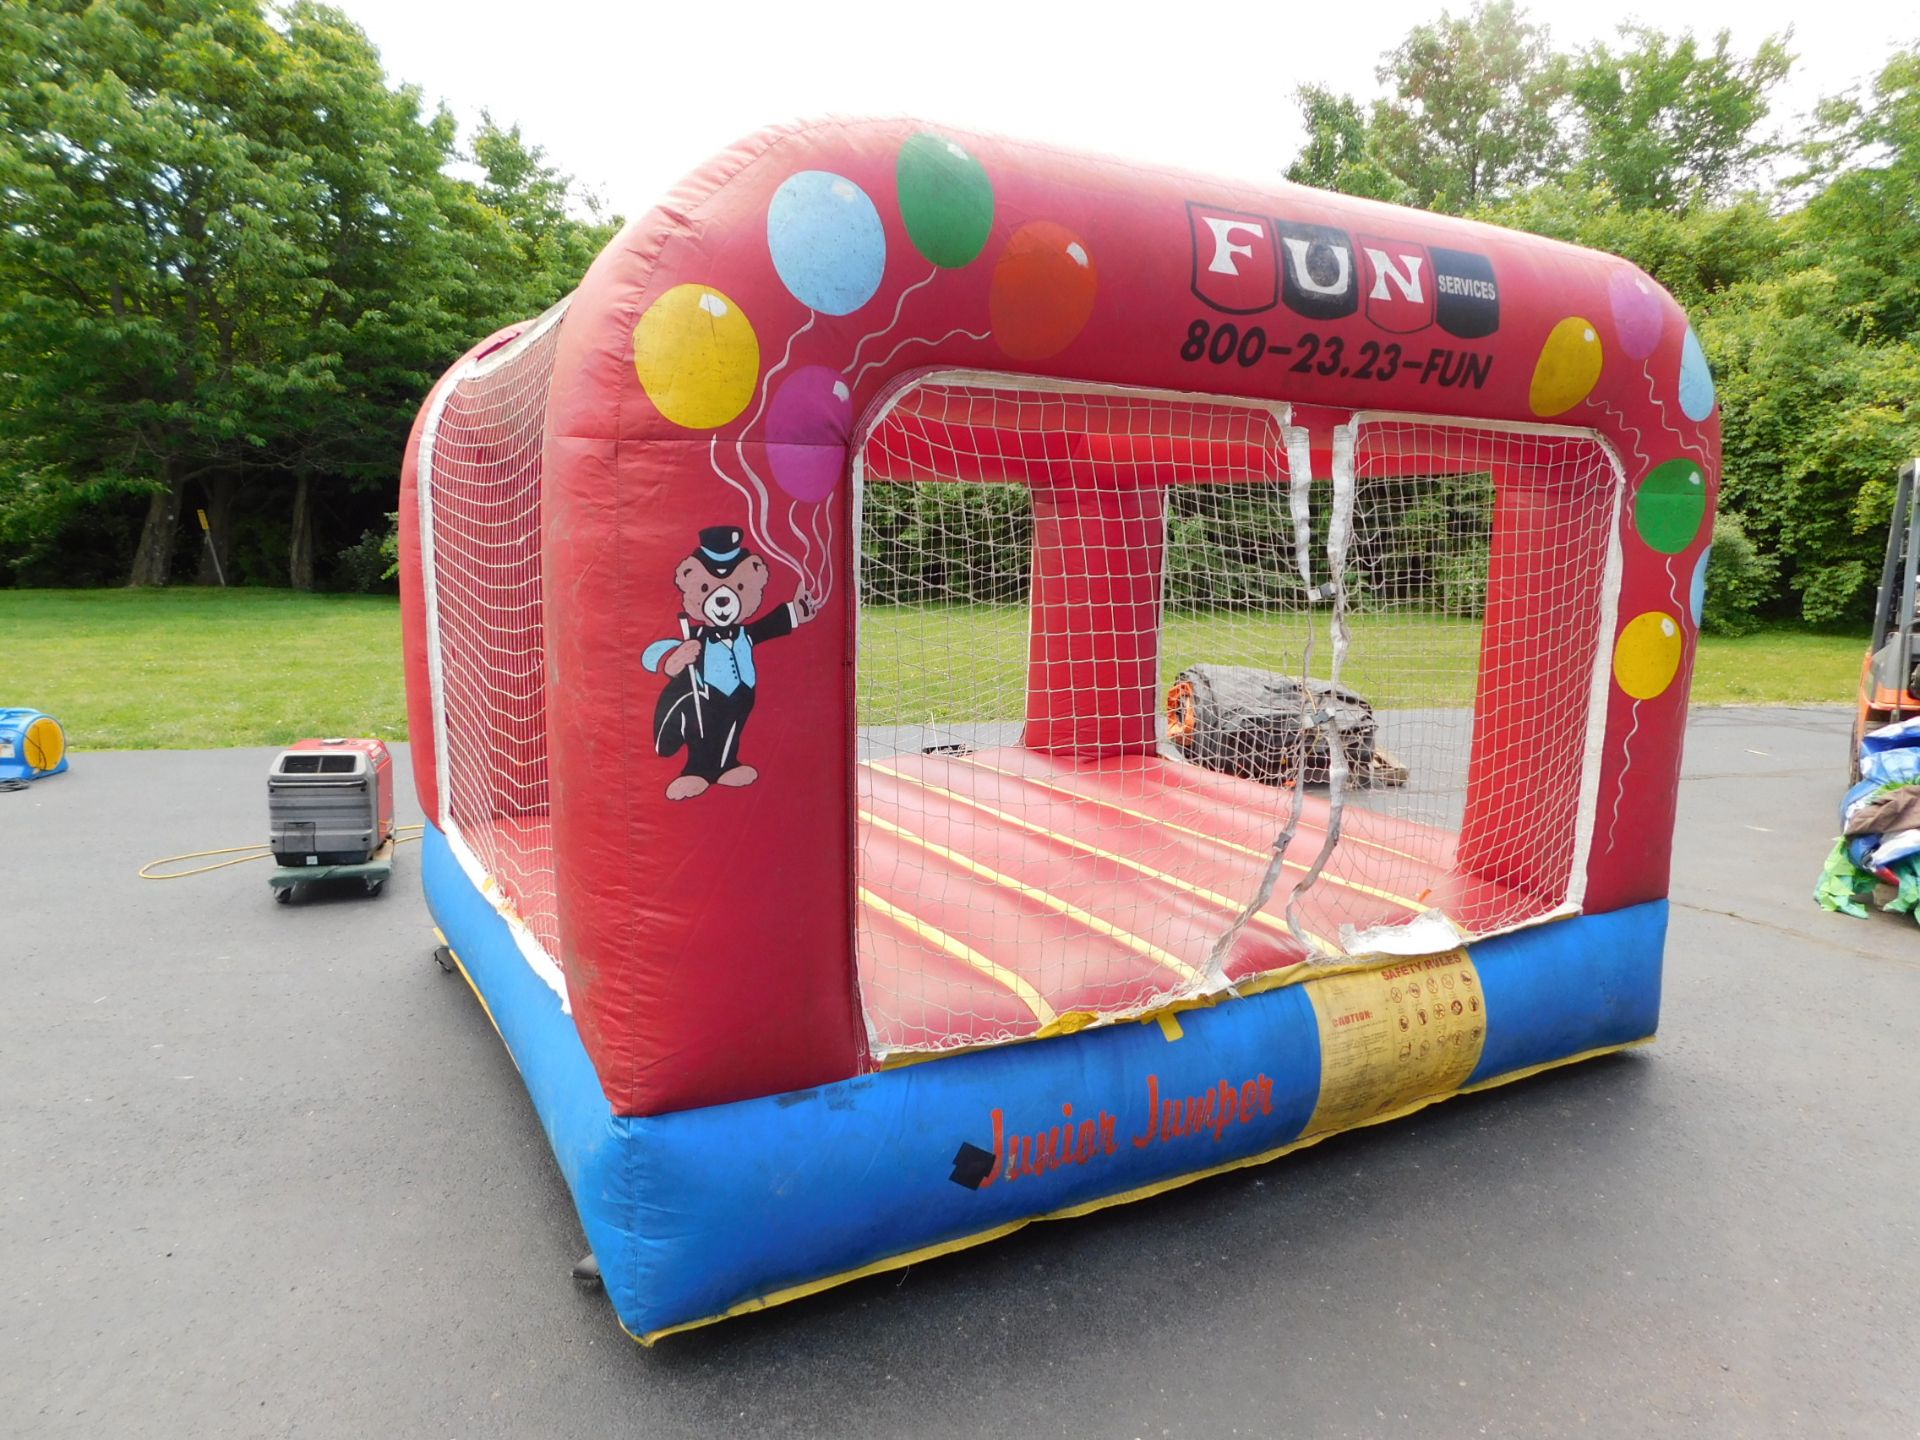 Inflatable Fun Service Bounce House, 1pc. 1 Blower required, Junior Jumper 11'WX11'LX9'H #104